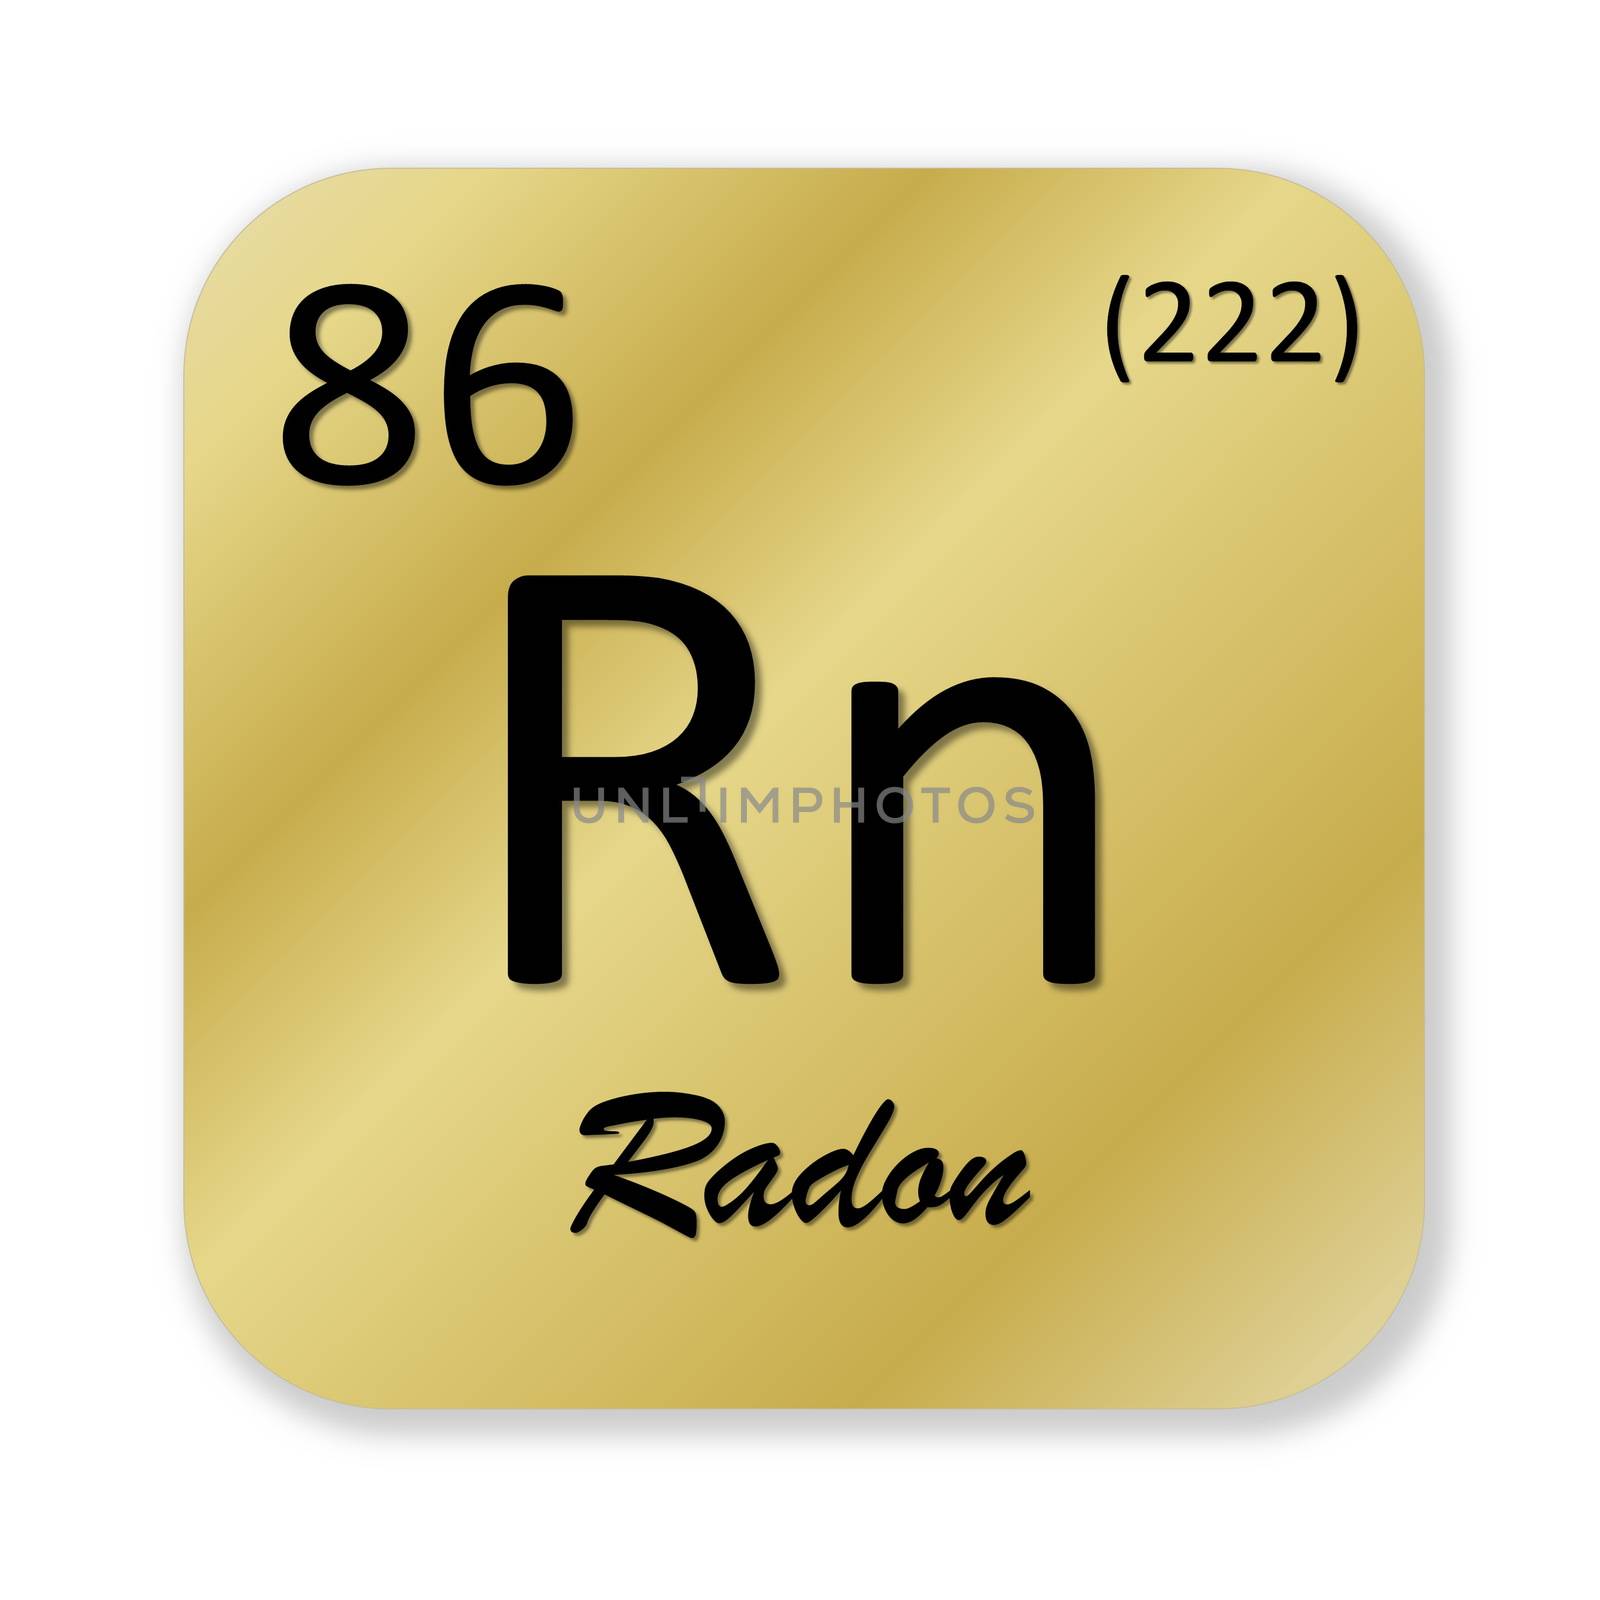 Black radon element into golden square shape isolated in white background